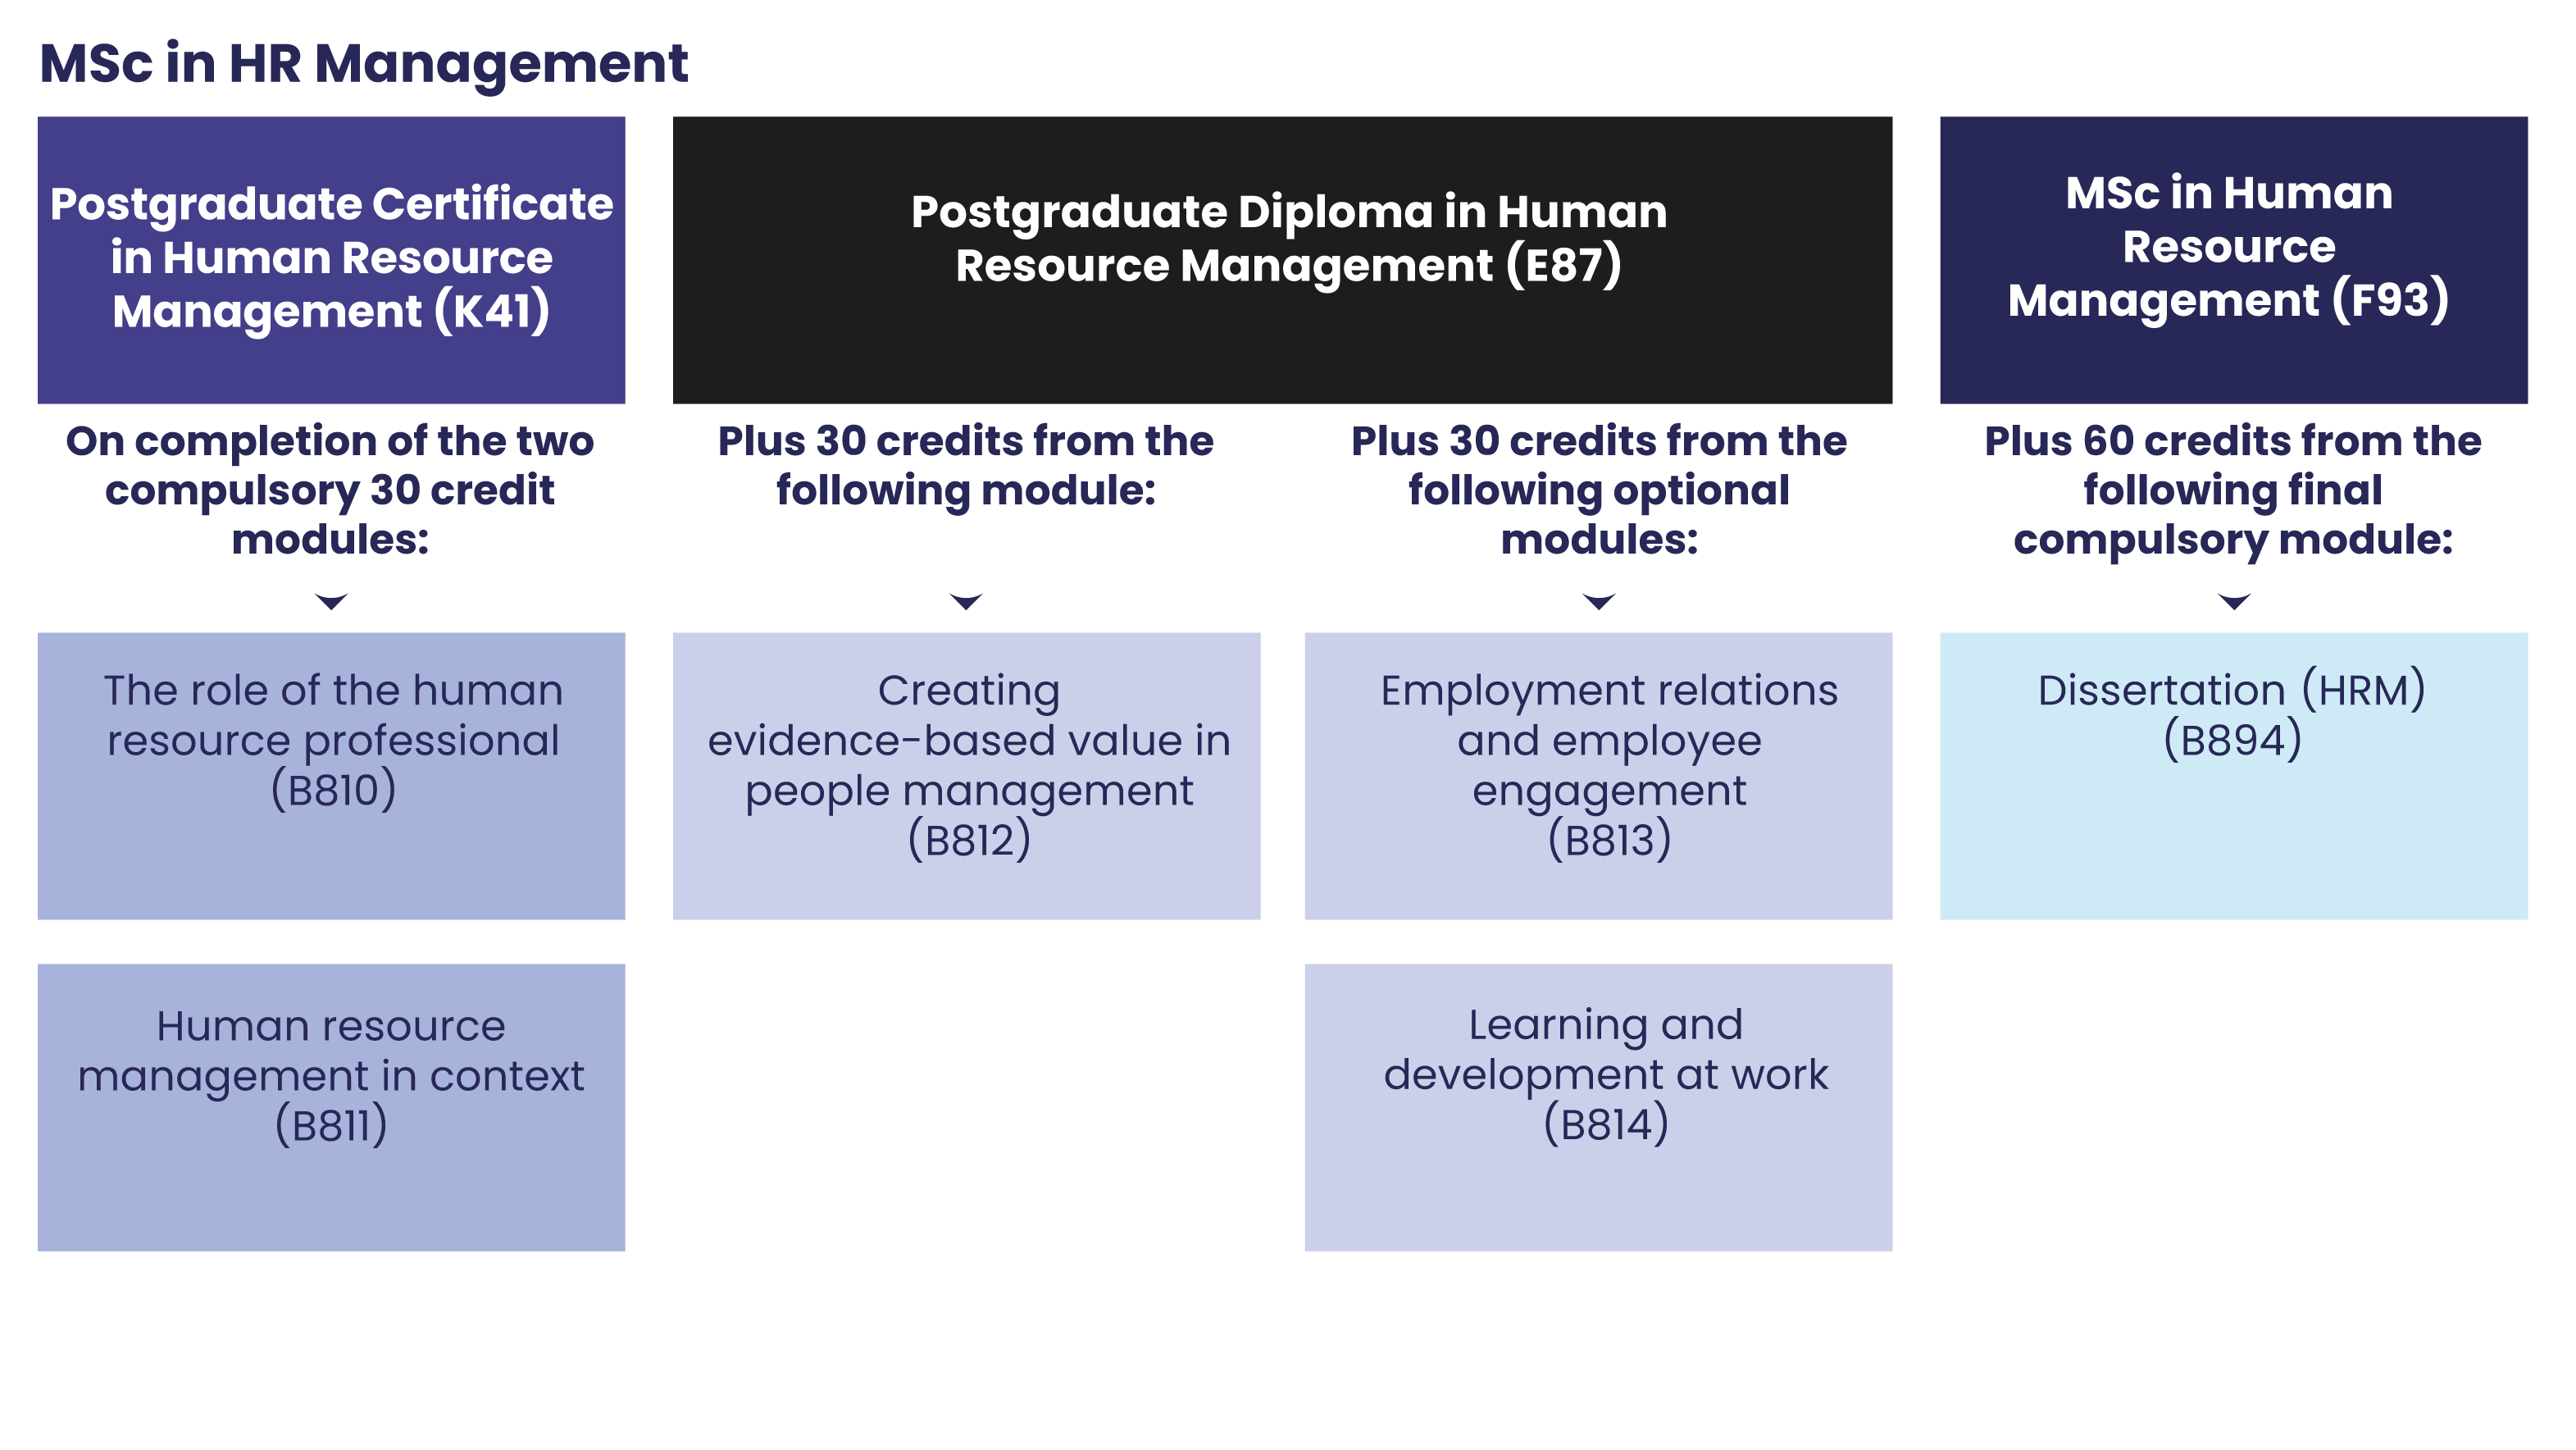 This diagram shows the full list of modules to study which make up the three stages of the full qualification. To gain the Postgraduate Certificate in Human Resource Management (K41) you will need to complete the following two compulsory 30 credit modules. The first module is The role of the human resource professional (B810). The second module is Human resource management in context (B811). To gain the Postgraduate Diploma in Human Resource Management (E87) you will need to complete the following modules. The first module is Creating evidence-based value in people management (B812). Then you will need to choose a 30 credit module from the following two optional modules. You can either choose to study Employement relations and employee engagement (B813) or Learning and development at work (B814). To gain the MSc in Human Resource Management (F93) you will need to complete the final compulsory module: Dissertation (HRM) (B894). 